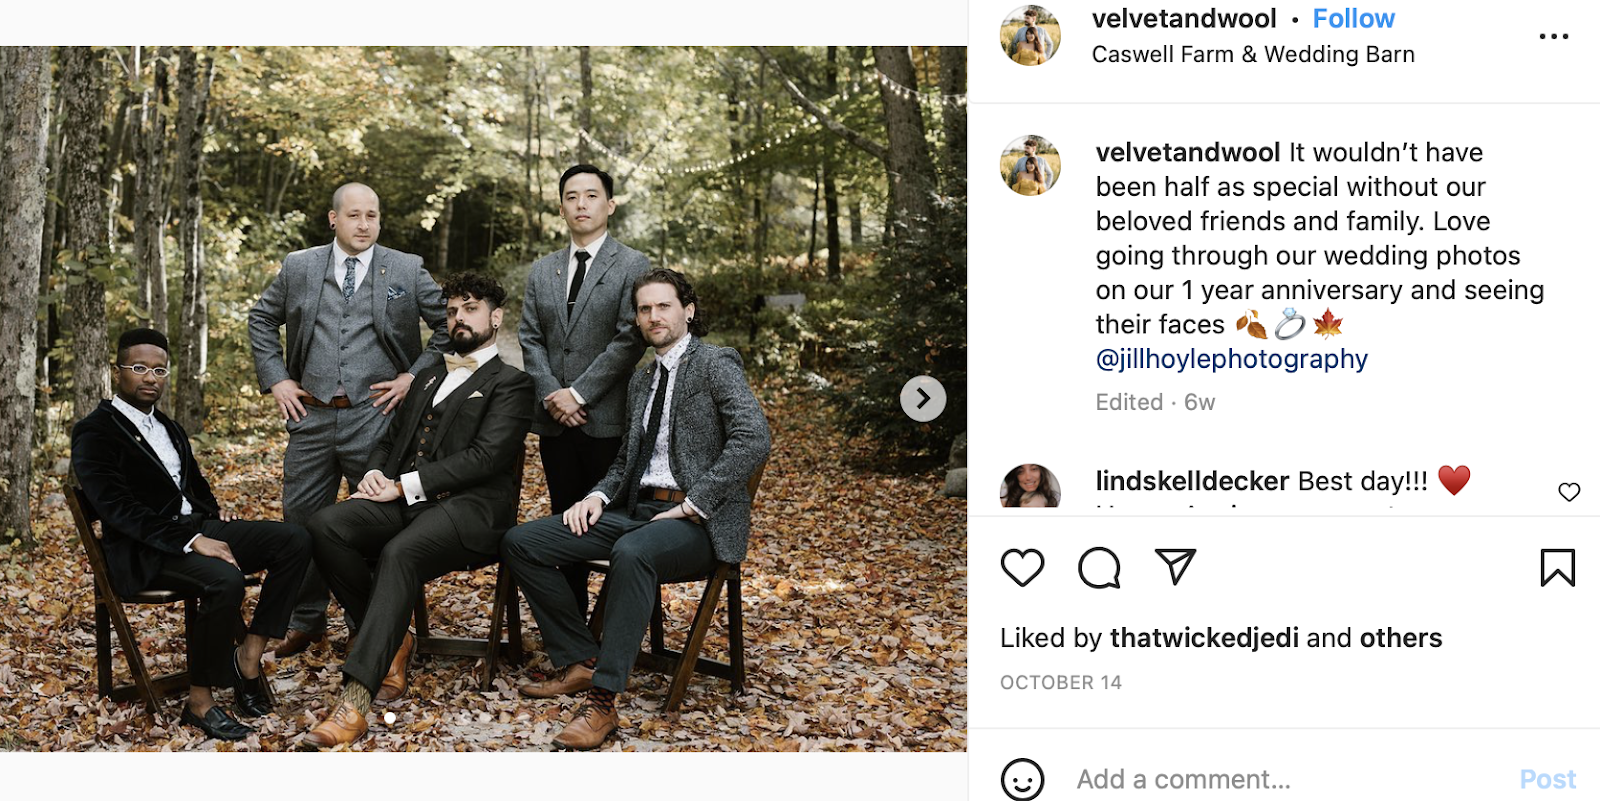 photo of groom and groomsmen posing in forest